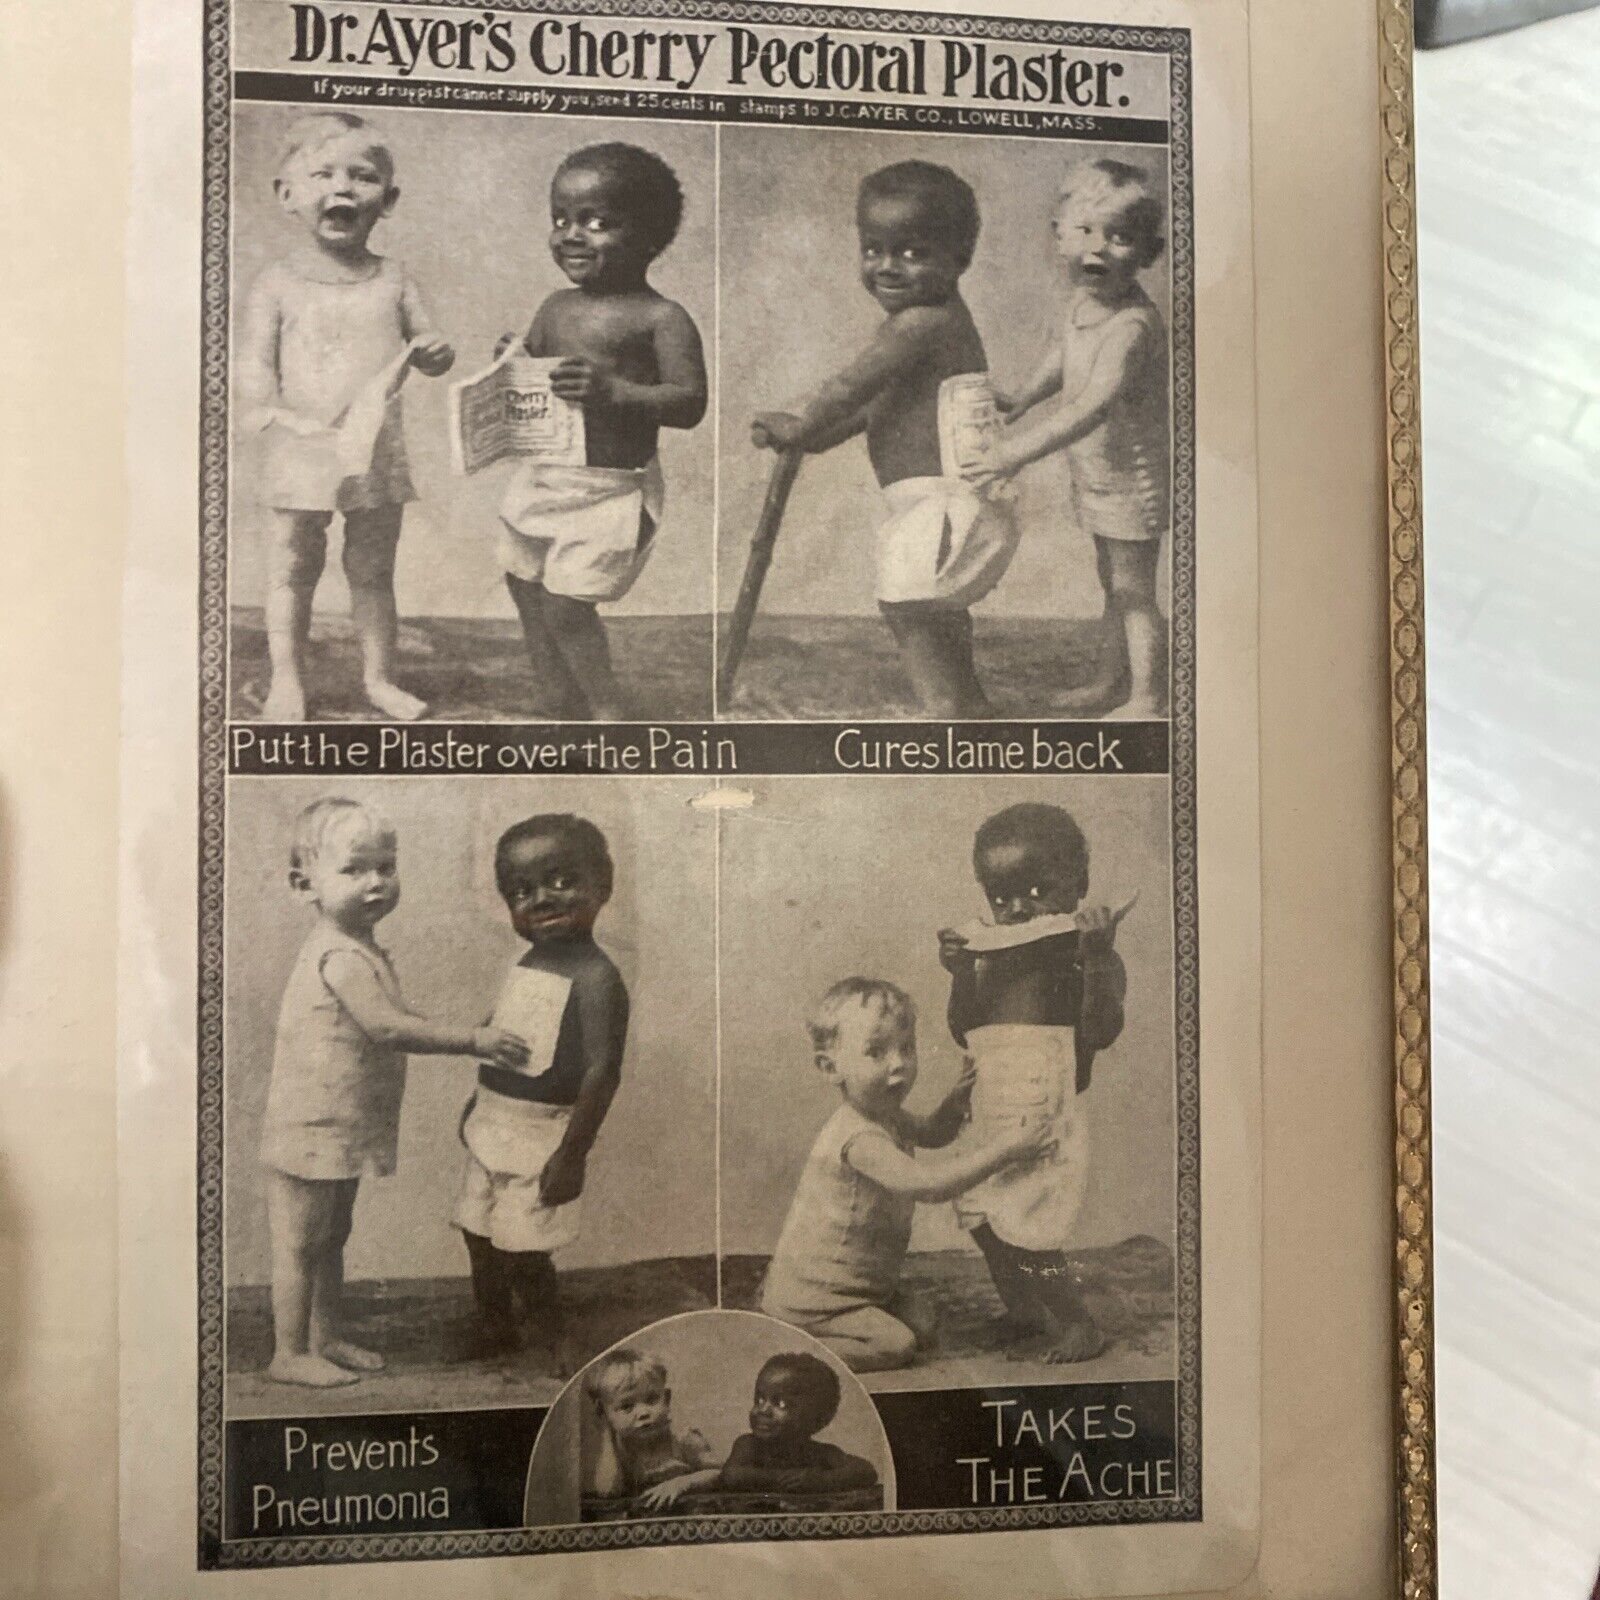 VTG 1930s Trade Card African American Black Ad Dr. Ayer’s Pectoral Plaster Mass